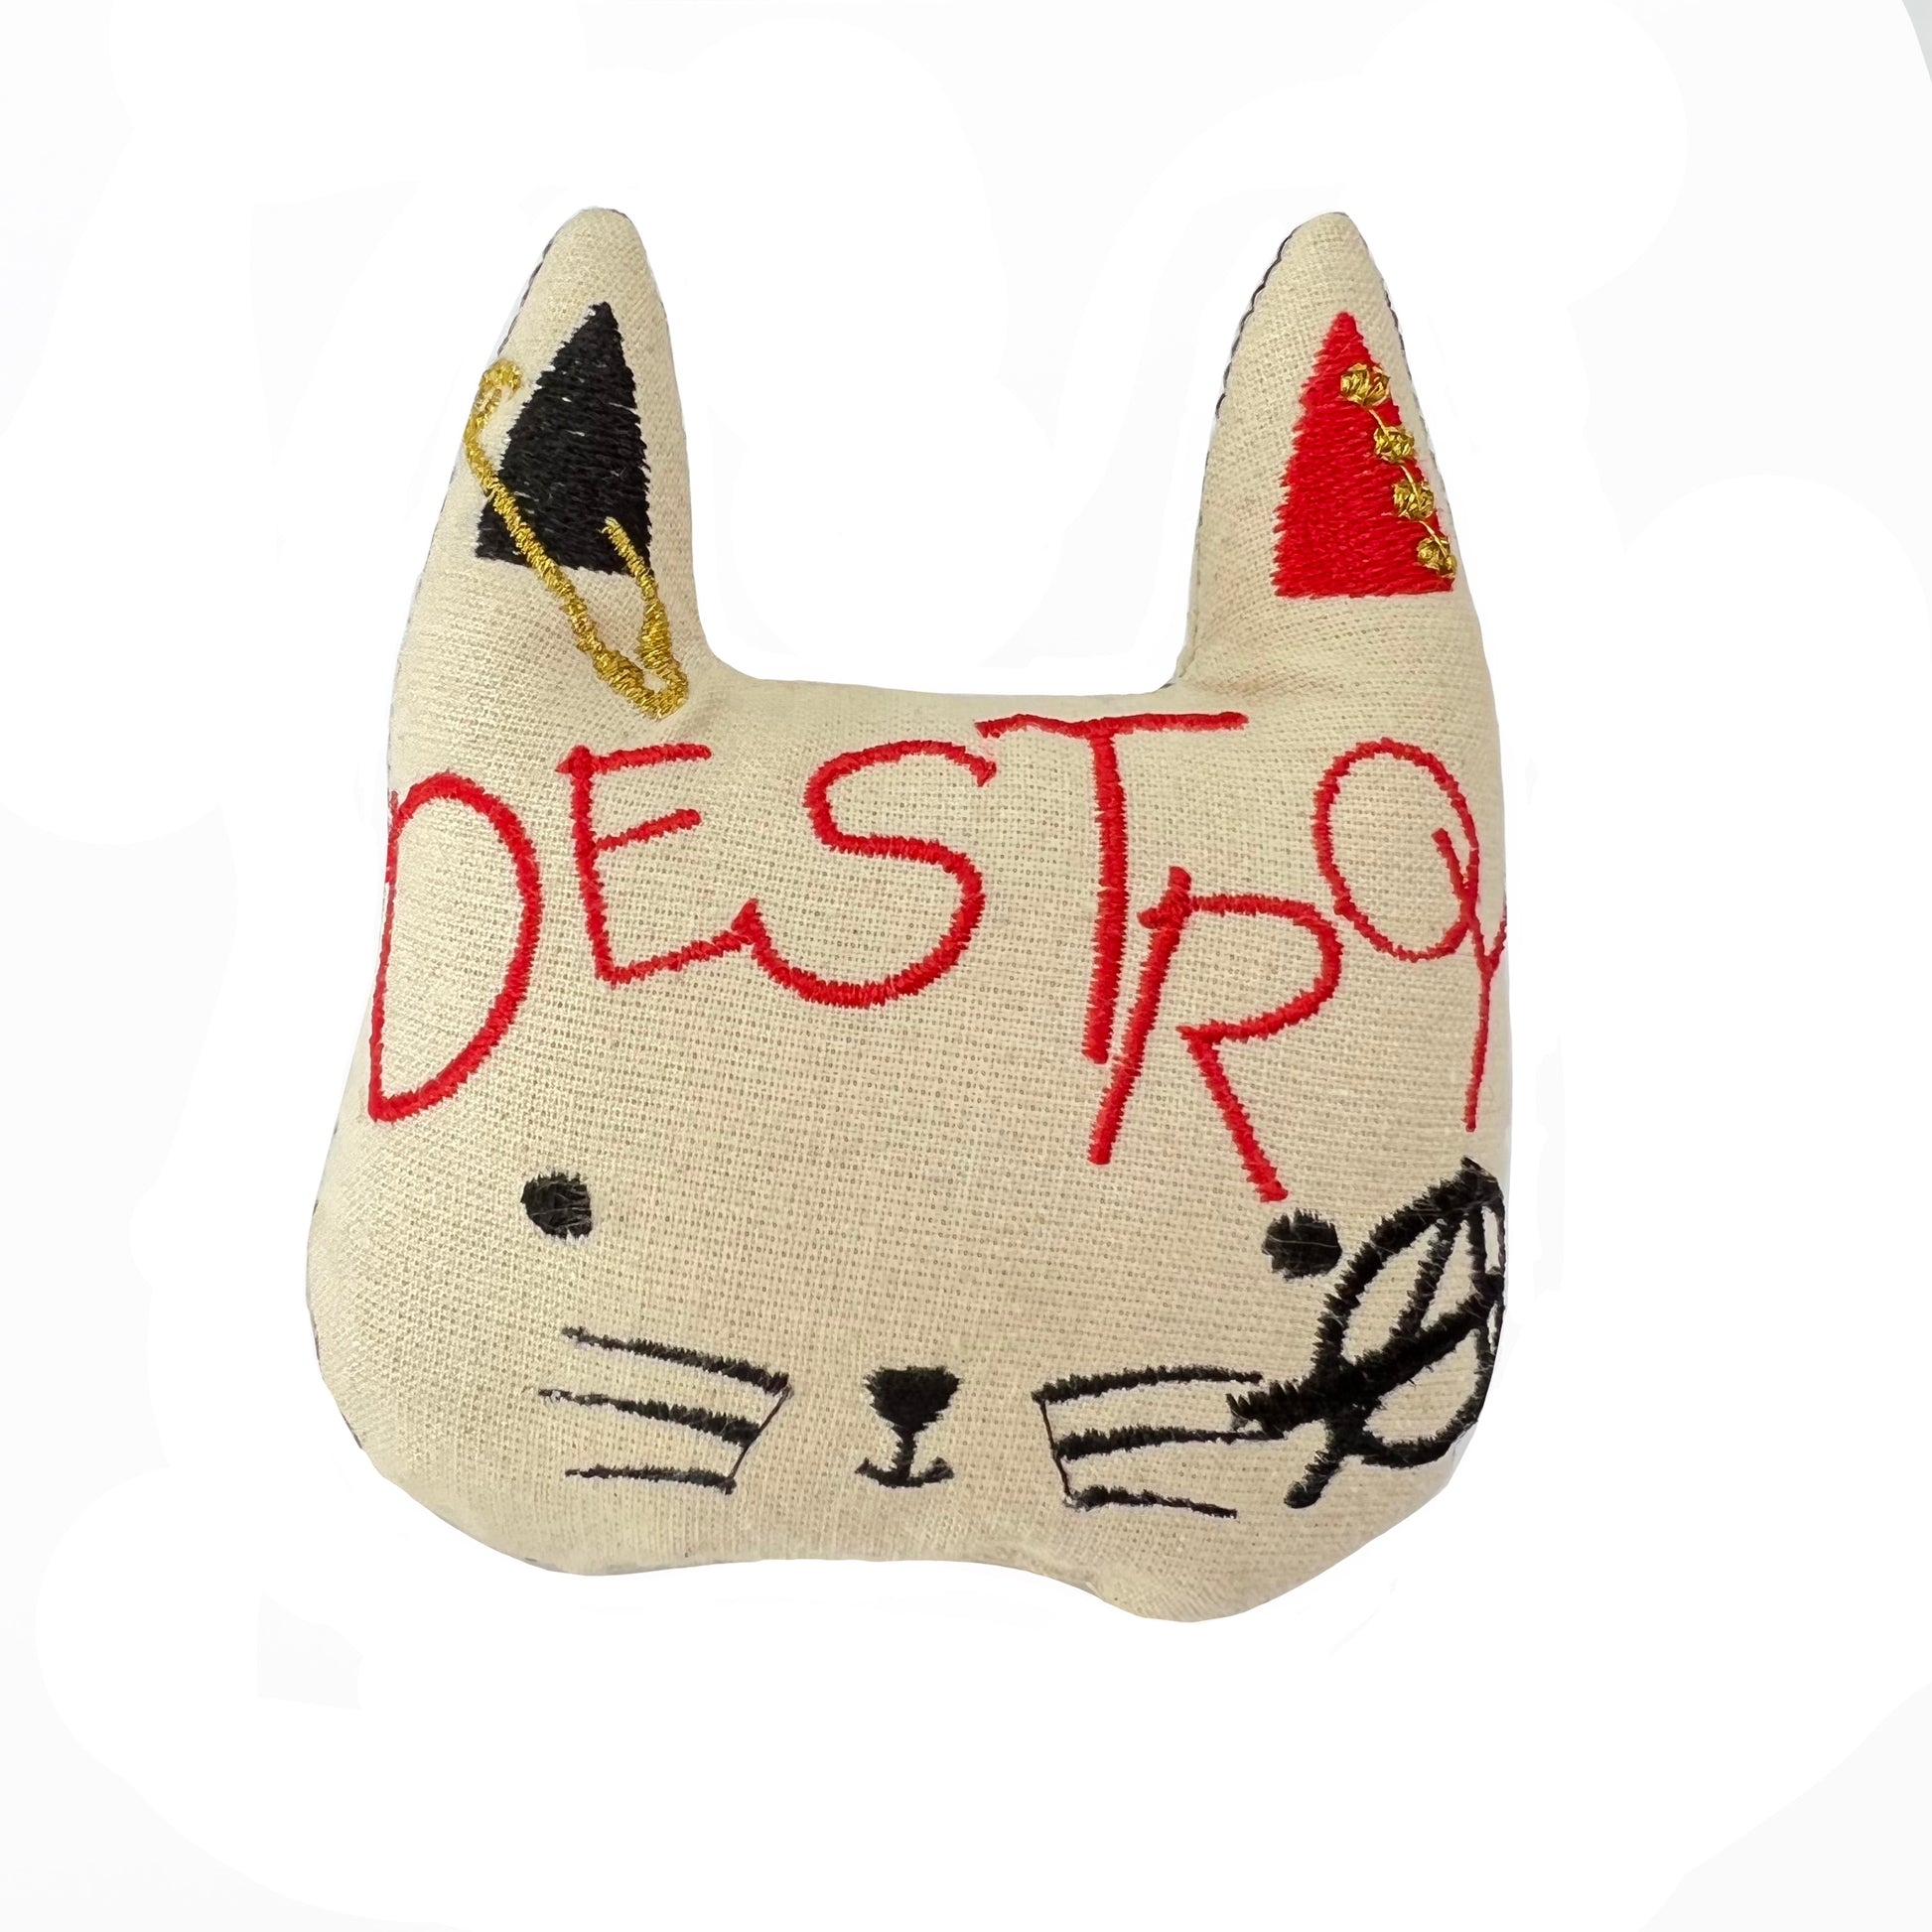 Freak Meowt Luxury Cat Toys, Gifts for Cats Kitty Vicious, Handmade in Wales